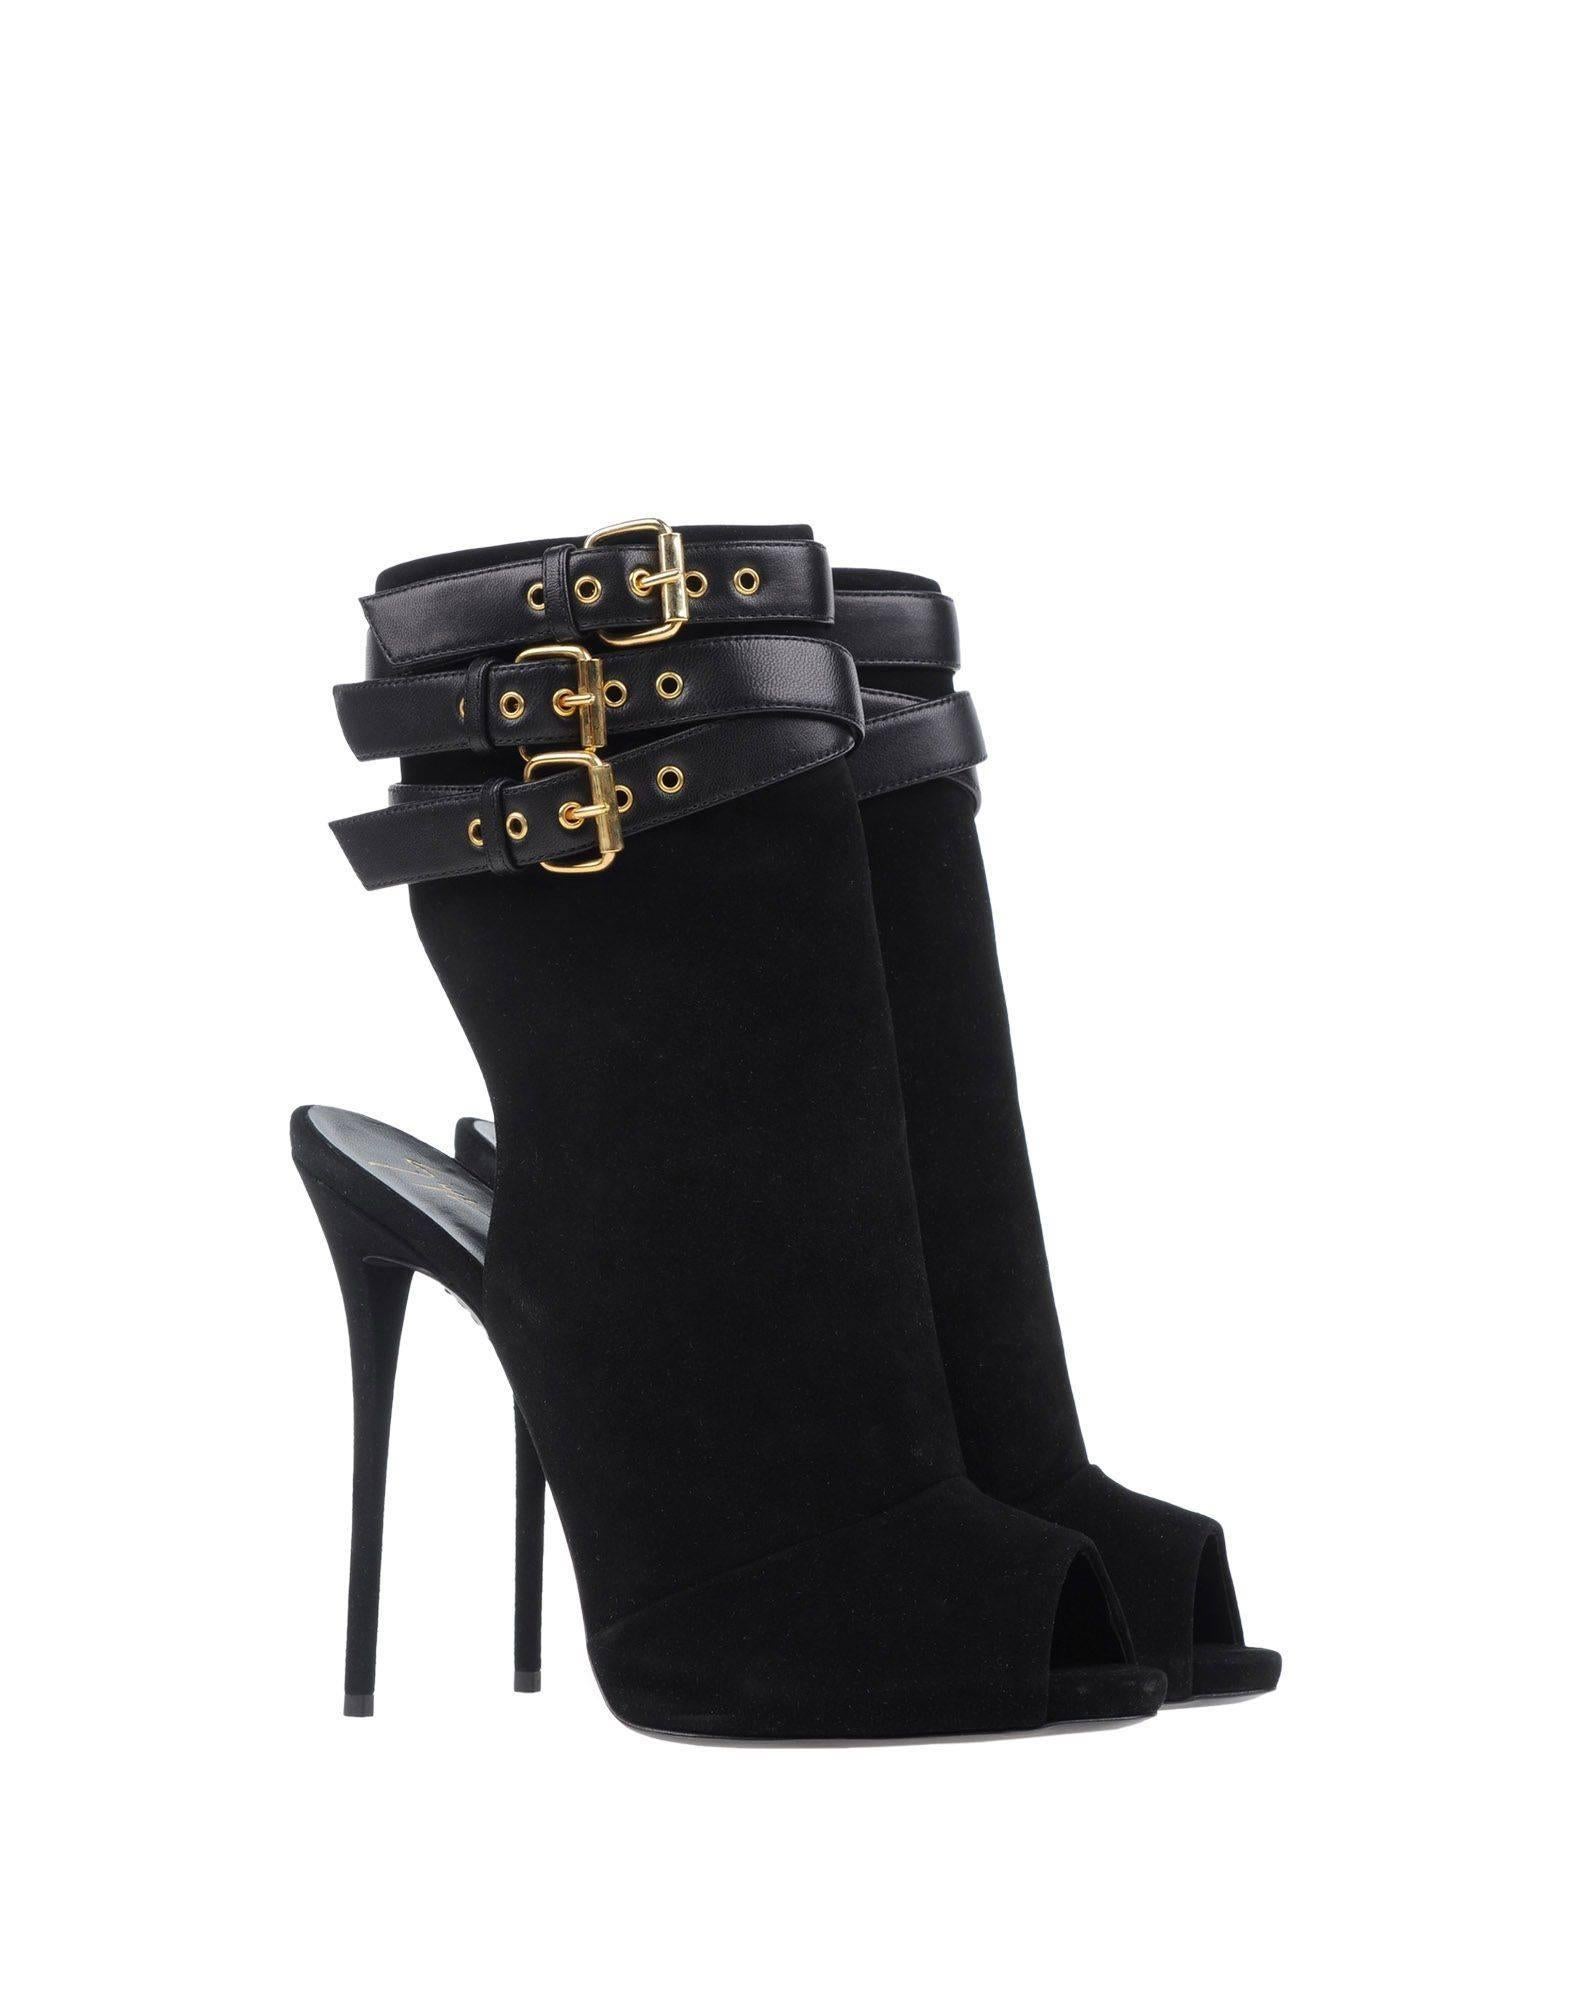 Giuseppe Zanotti New Black Suede Leather Buckle Ankle Boots Booties in Box

Size IT 36
Suede
Leather
Gold tone hardware
Buckle closure
Made in Italy
Heel height 5.25"
Includes original Giuseppe Zanotti box